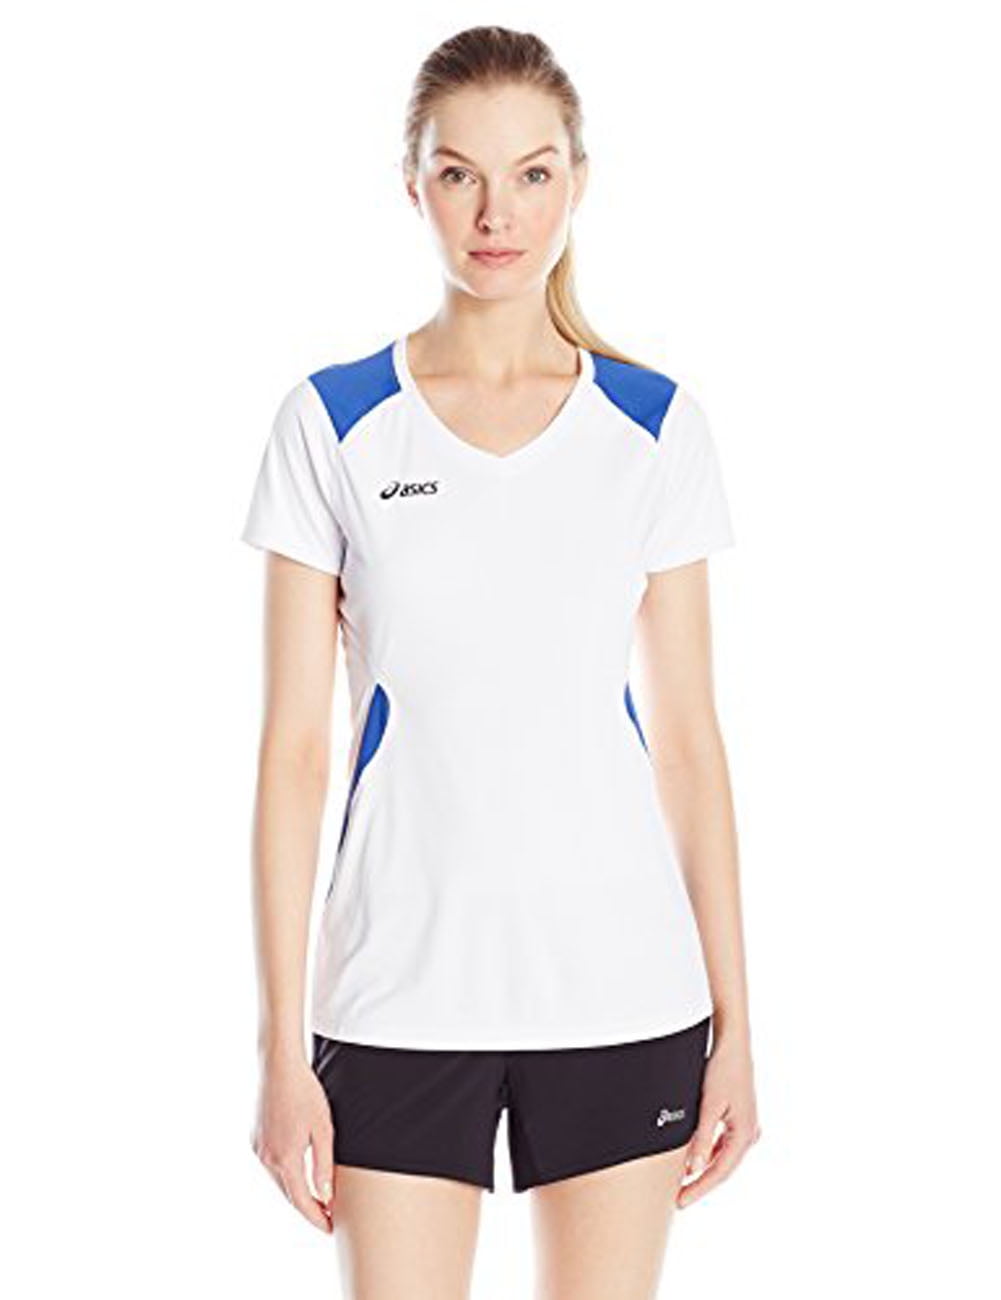 Royal Blue Volleyball Jersey 